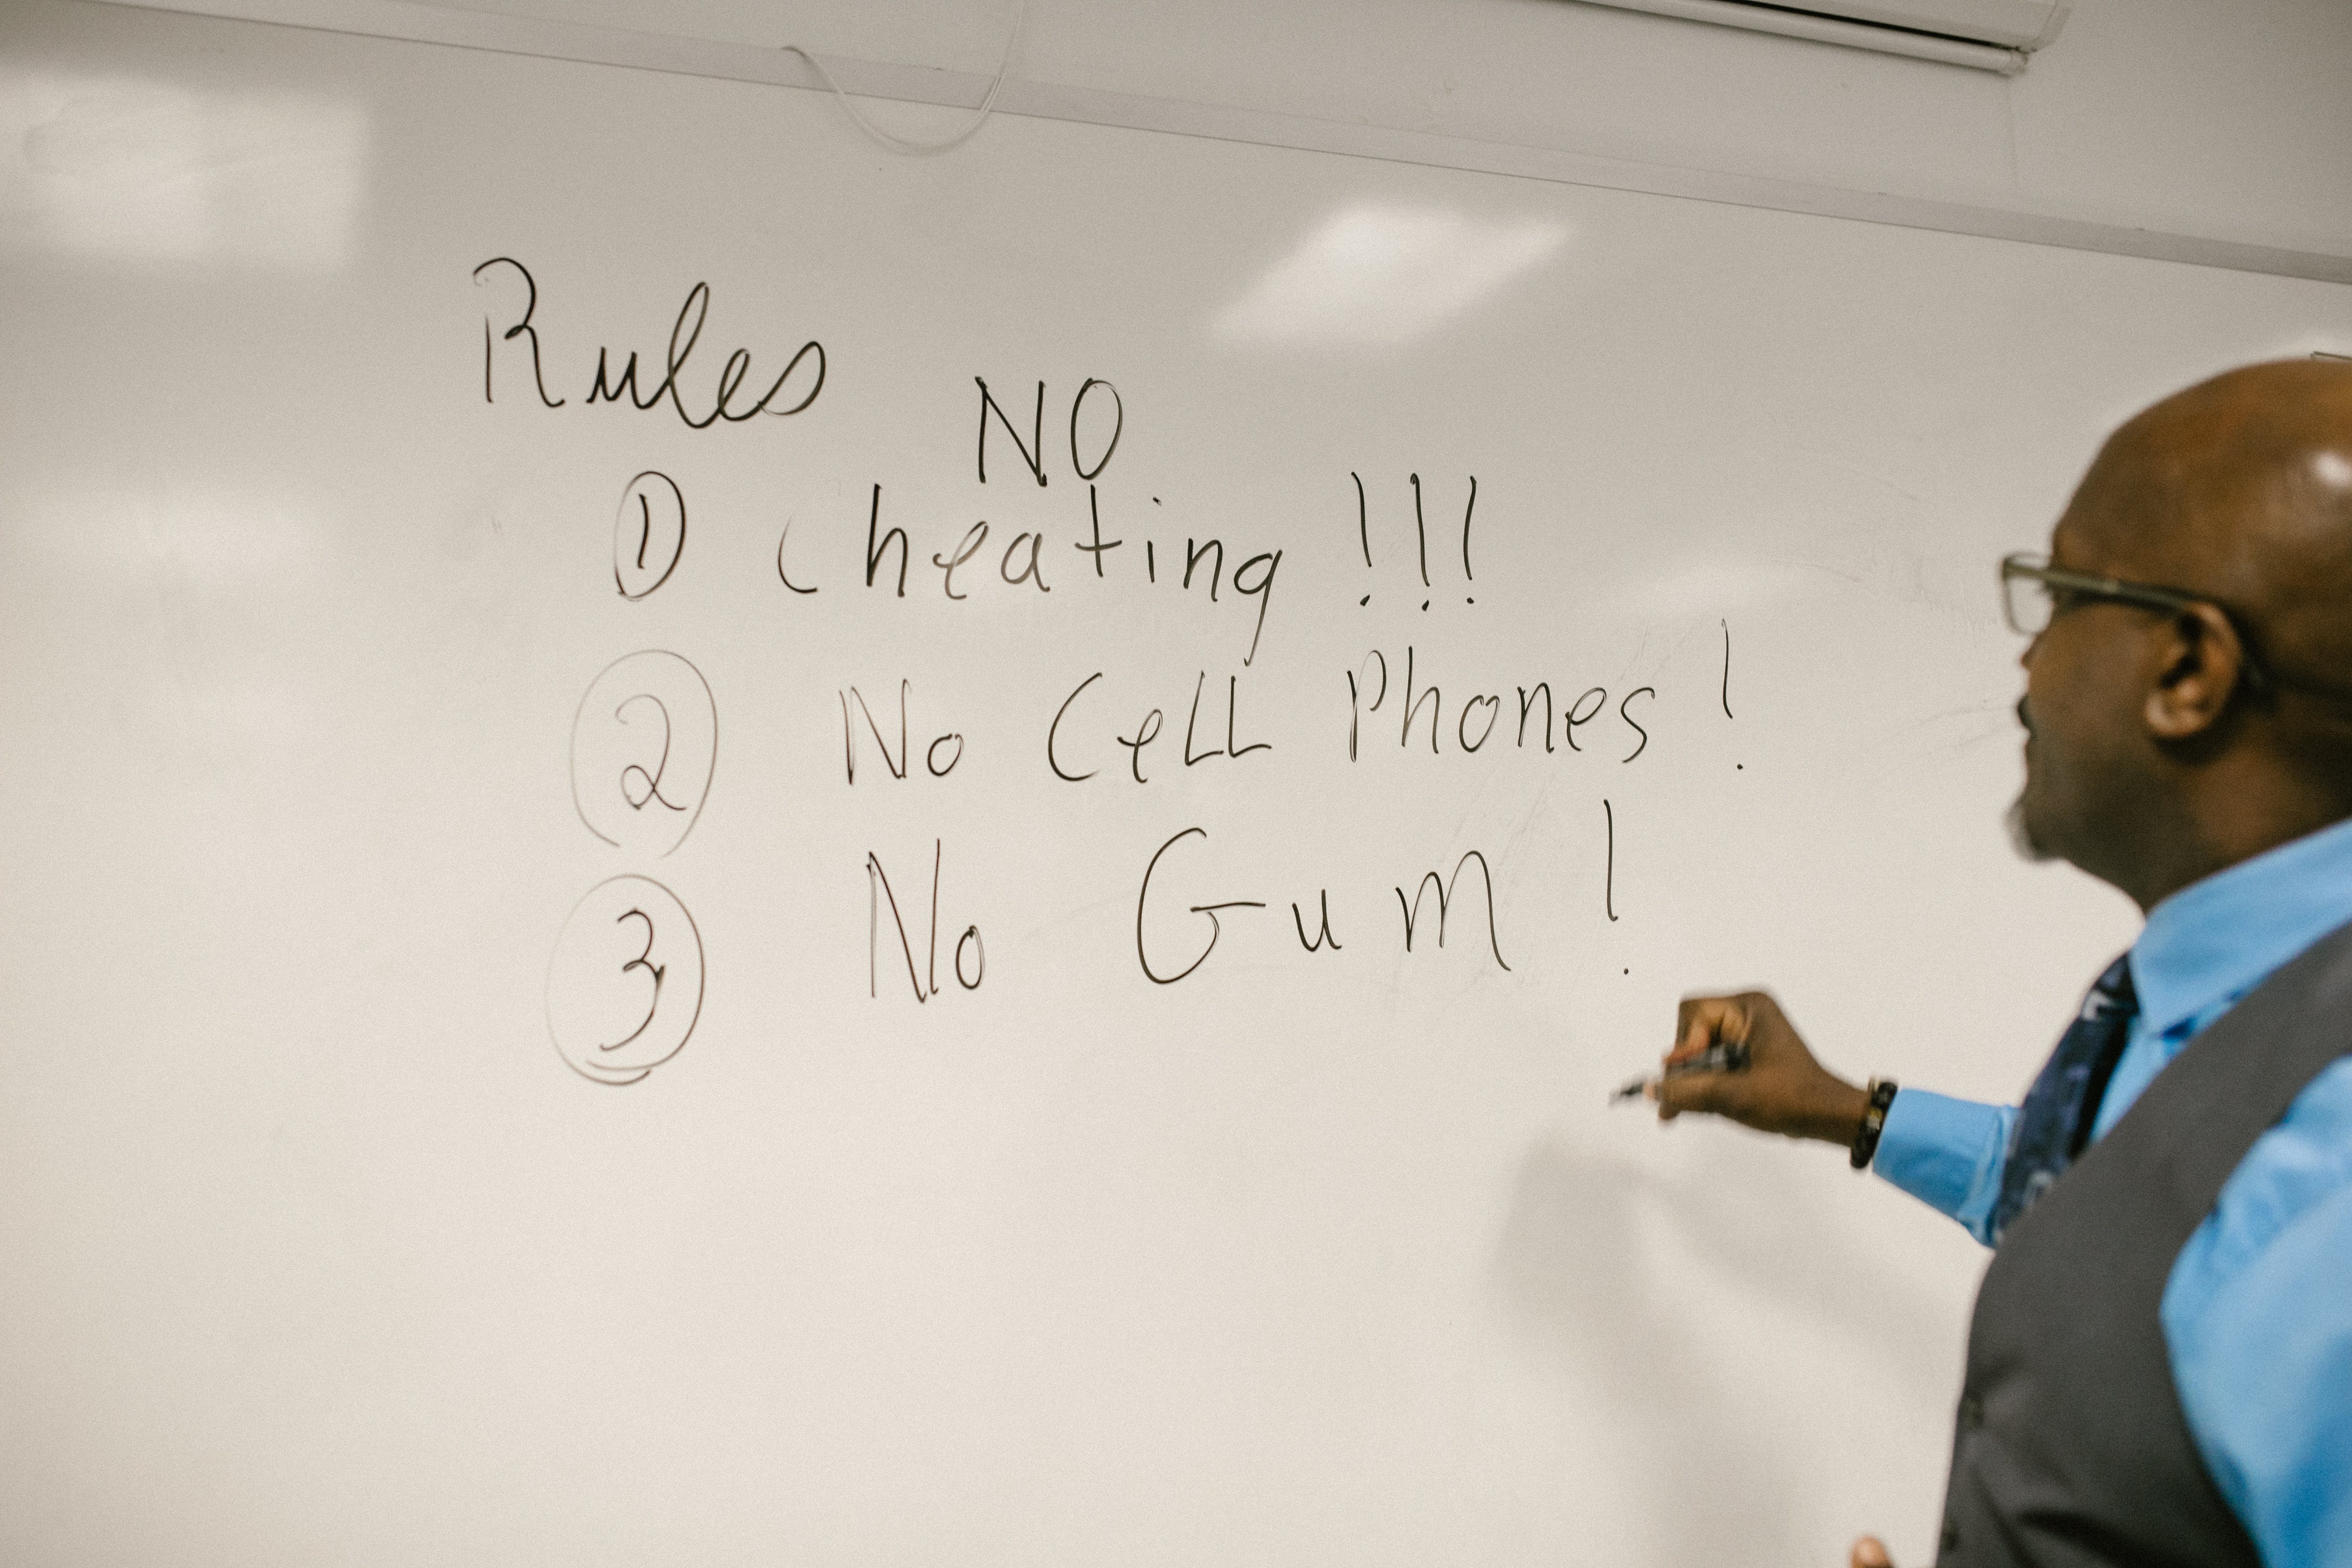 A man writing down rules on a whiteboard. | Source: Pexels